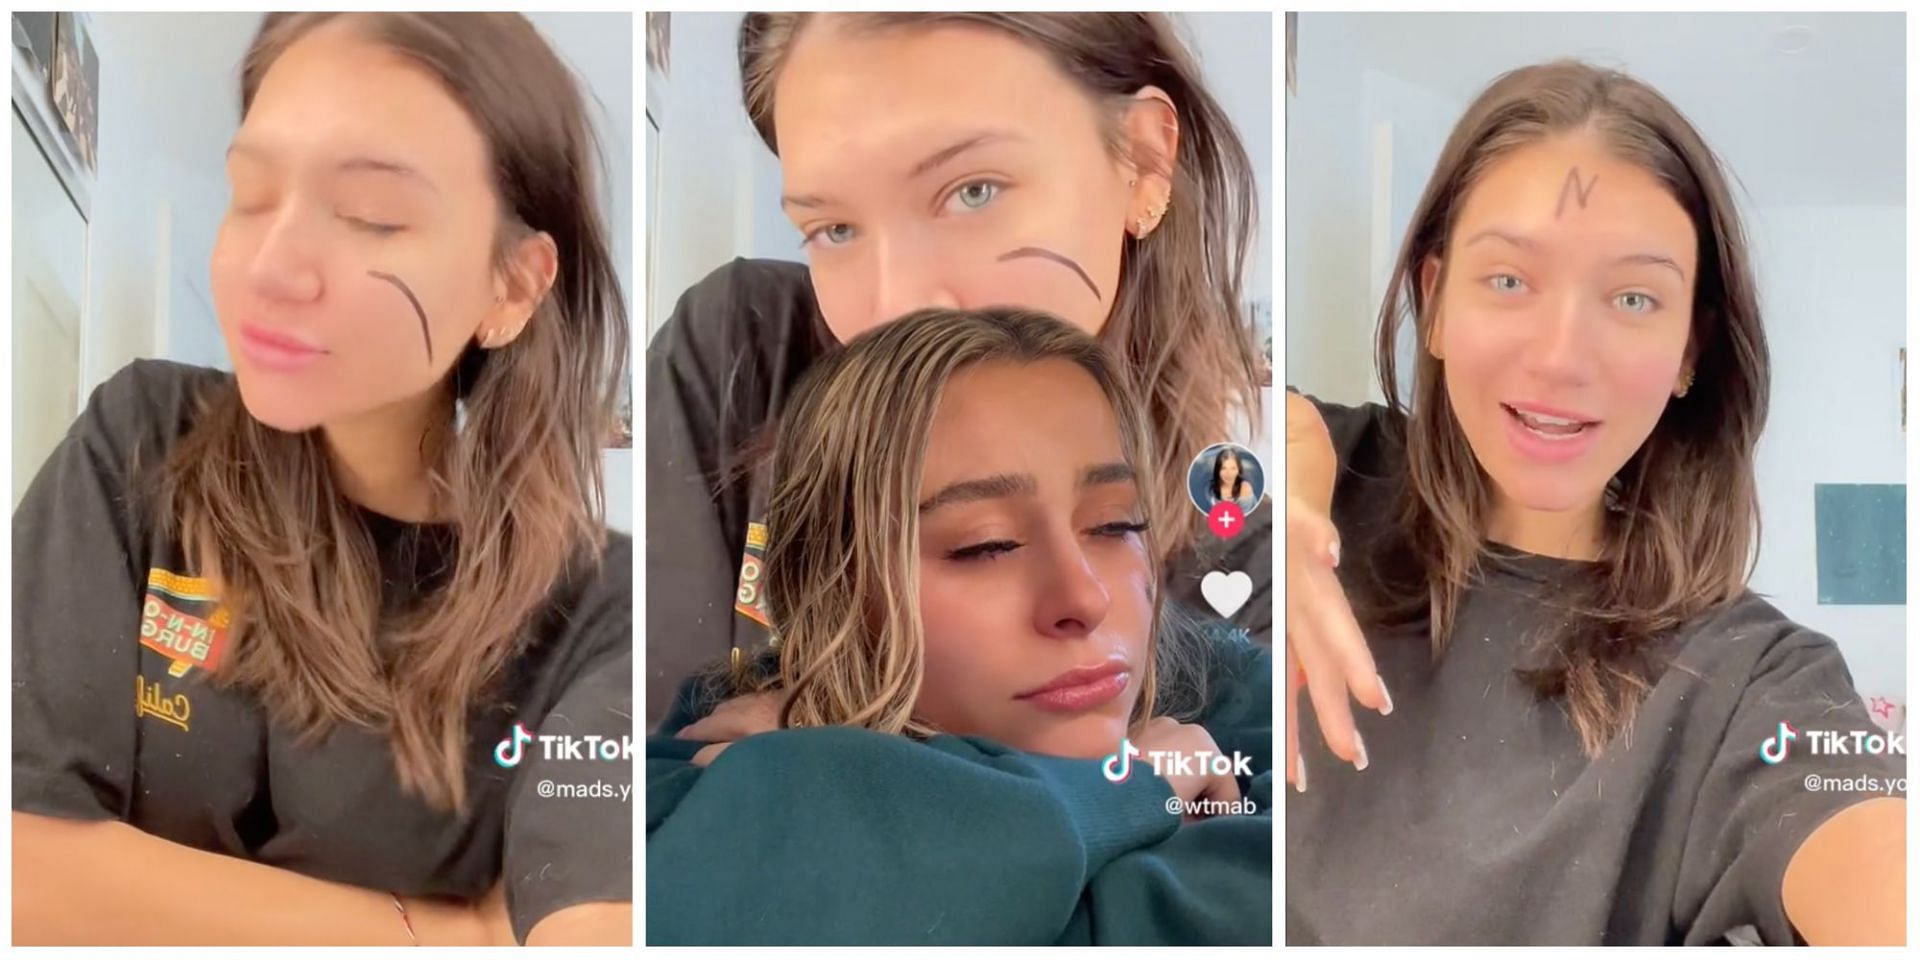 Did Mads Lewis really mock Annie, The Scar Girl in her recent video? Details and netizens reactions explored. (Image via TikTok)